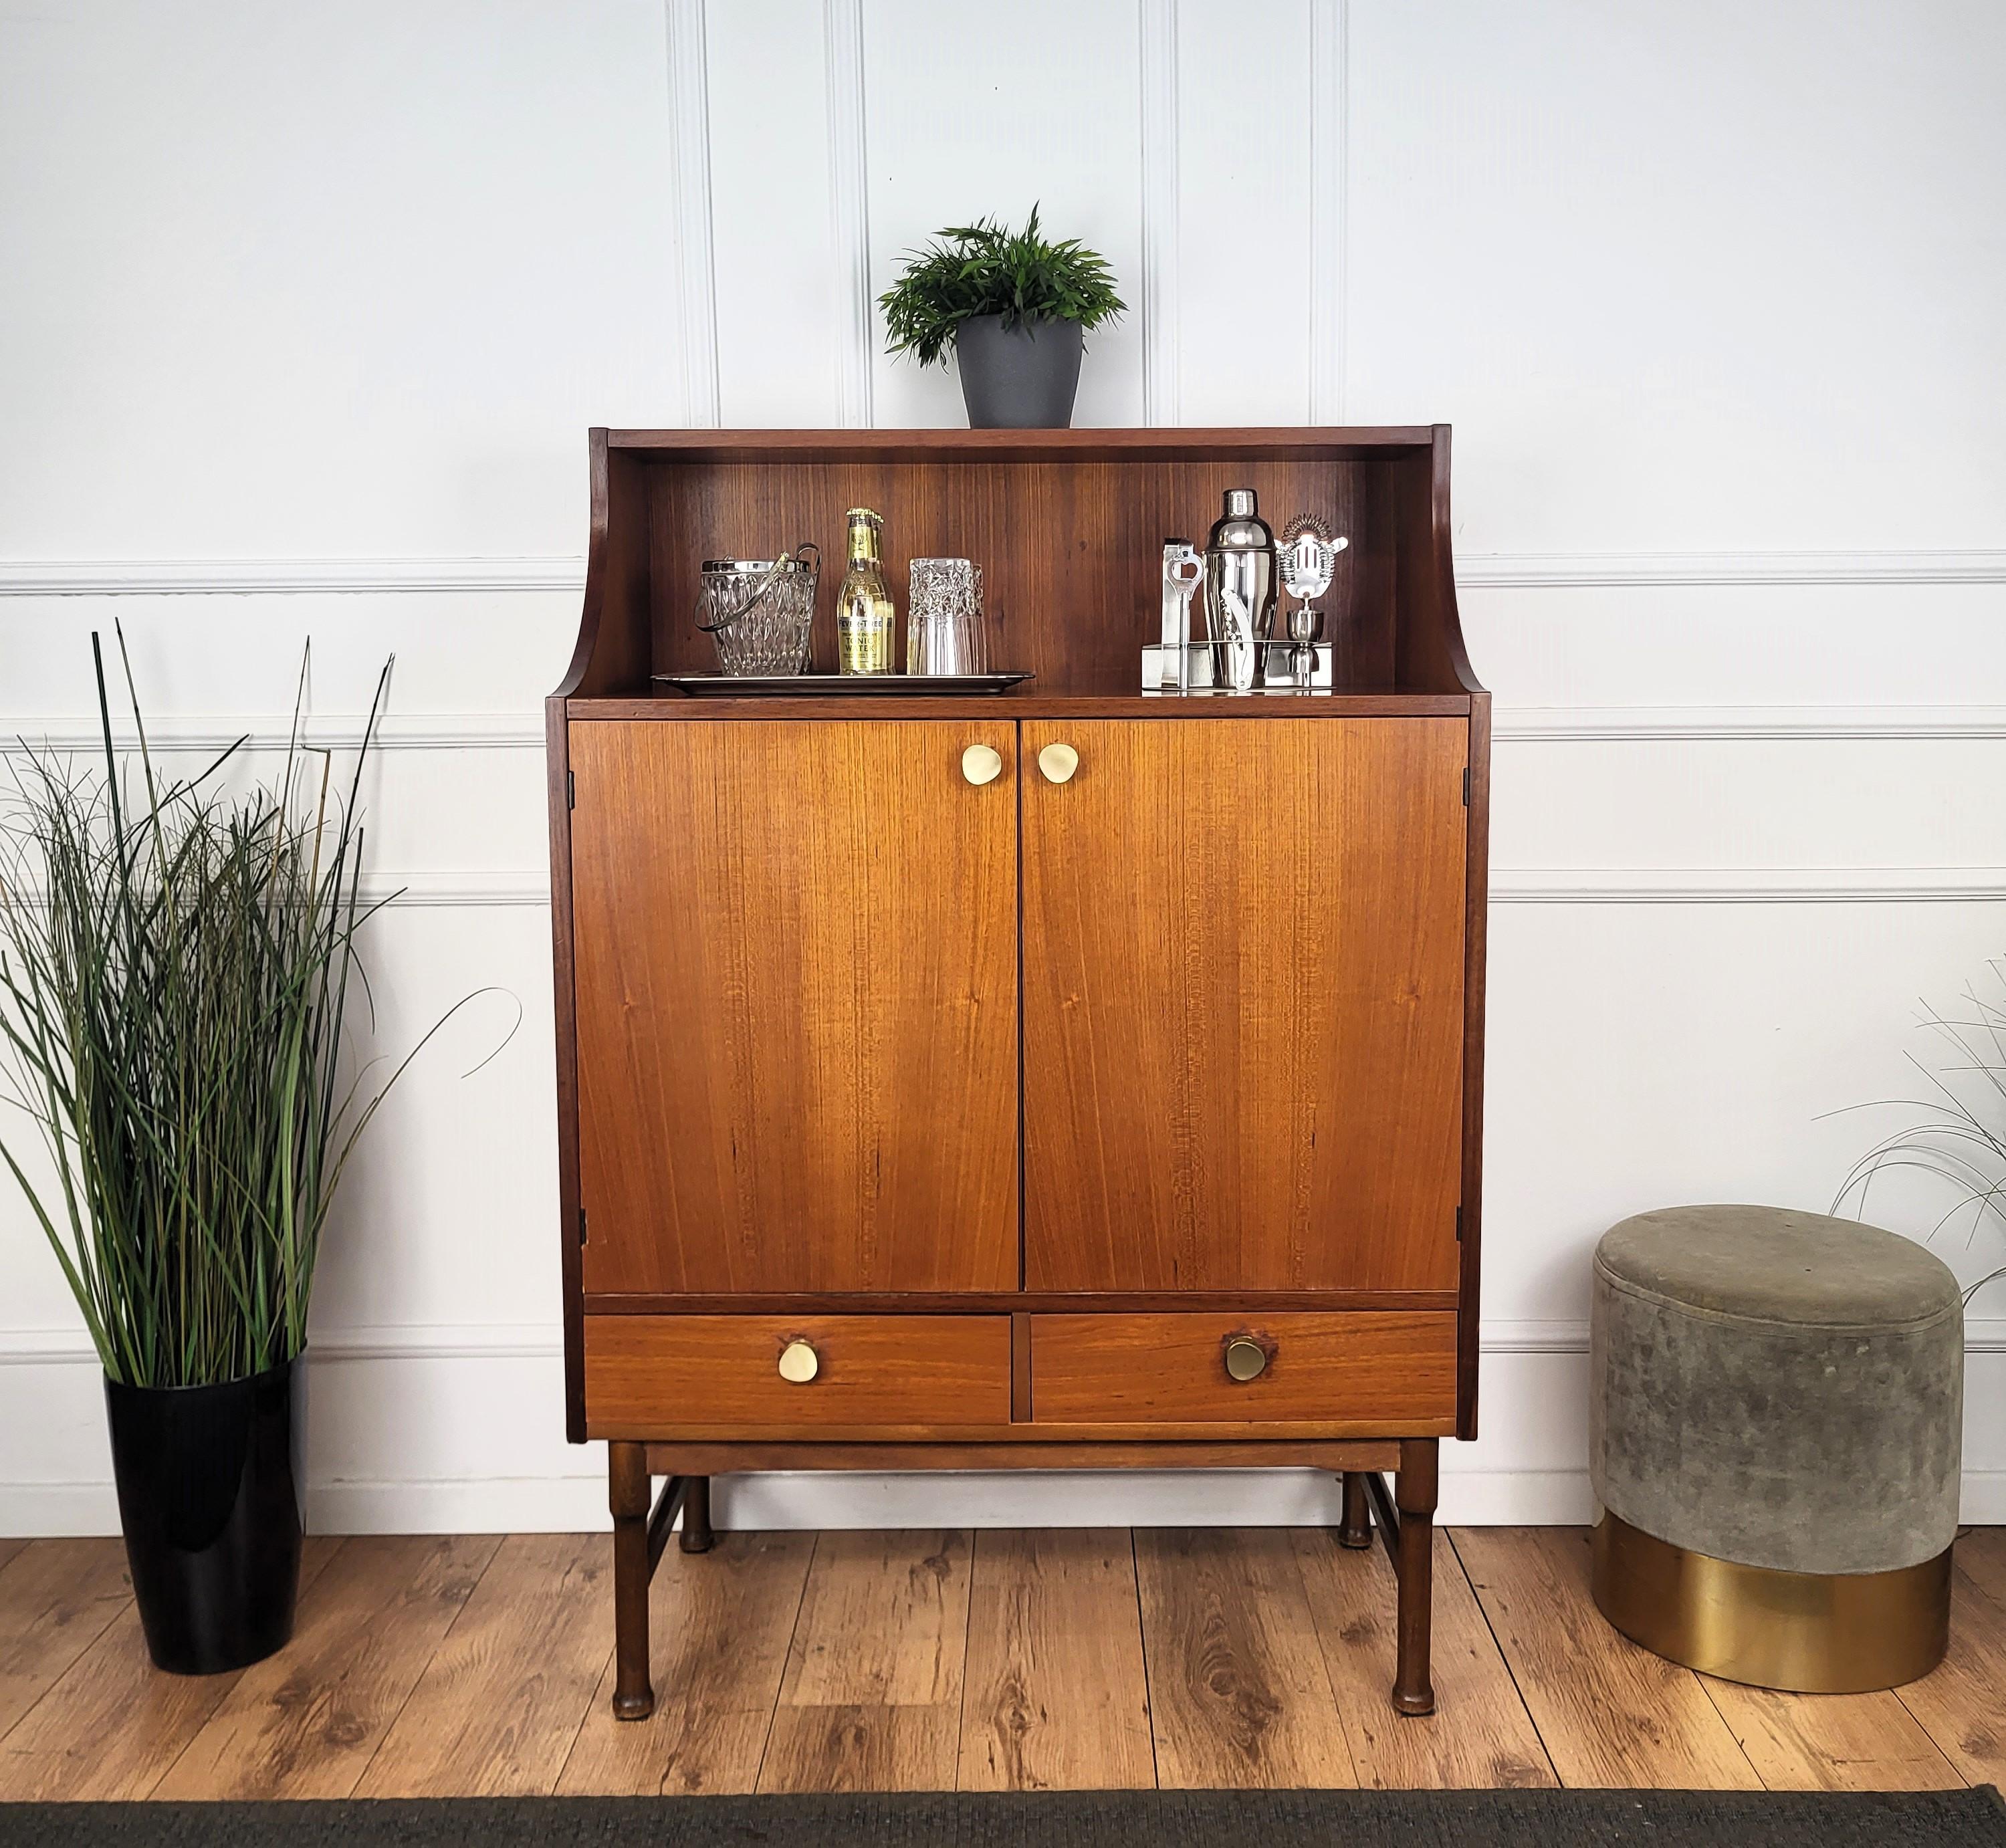 Very elegant Italian Mid-Century Modern dry bar cocktail cabinet, in beautiful wood with top shelves, central doors with internal storage, two bottom drawers all highlighted by the brass handes and standing on typical carved Italian Mid-Century